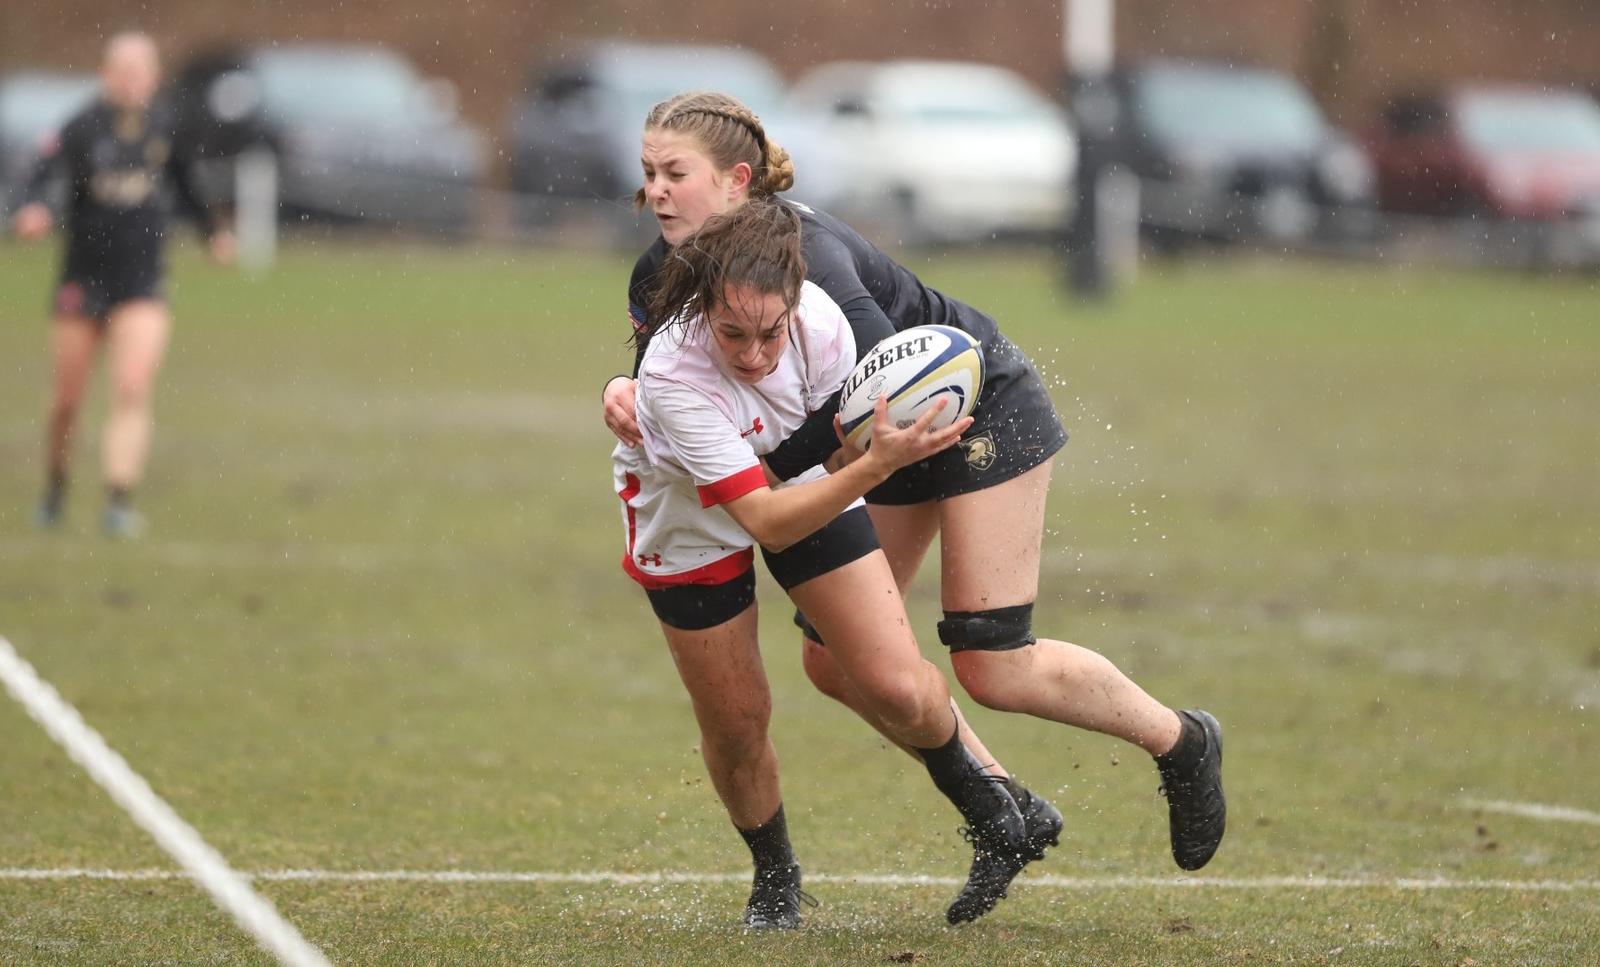 Women’s Rugby Advances to Premier Cup Semifinals at Collegiate Rugby Championship 7s